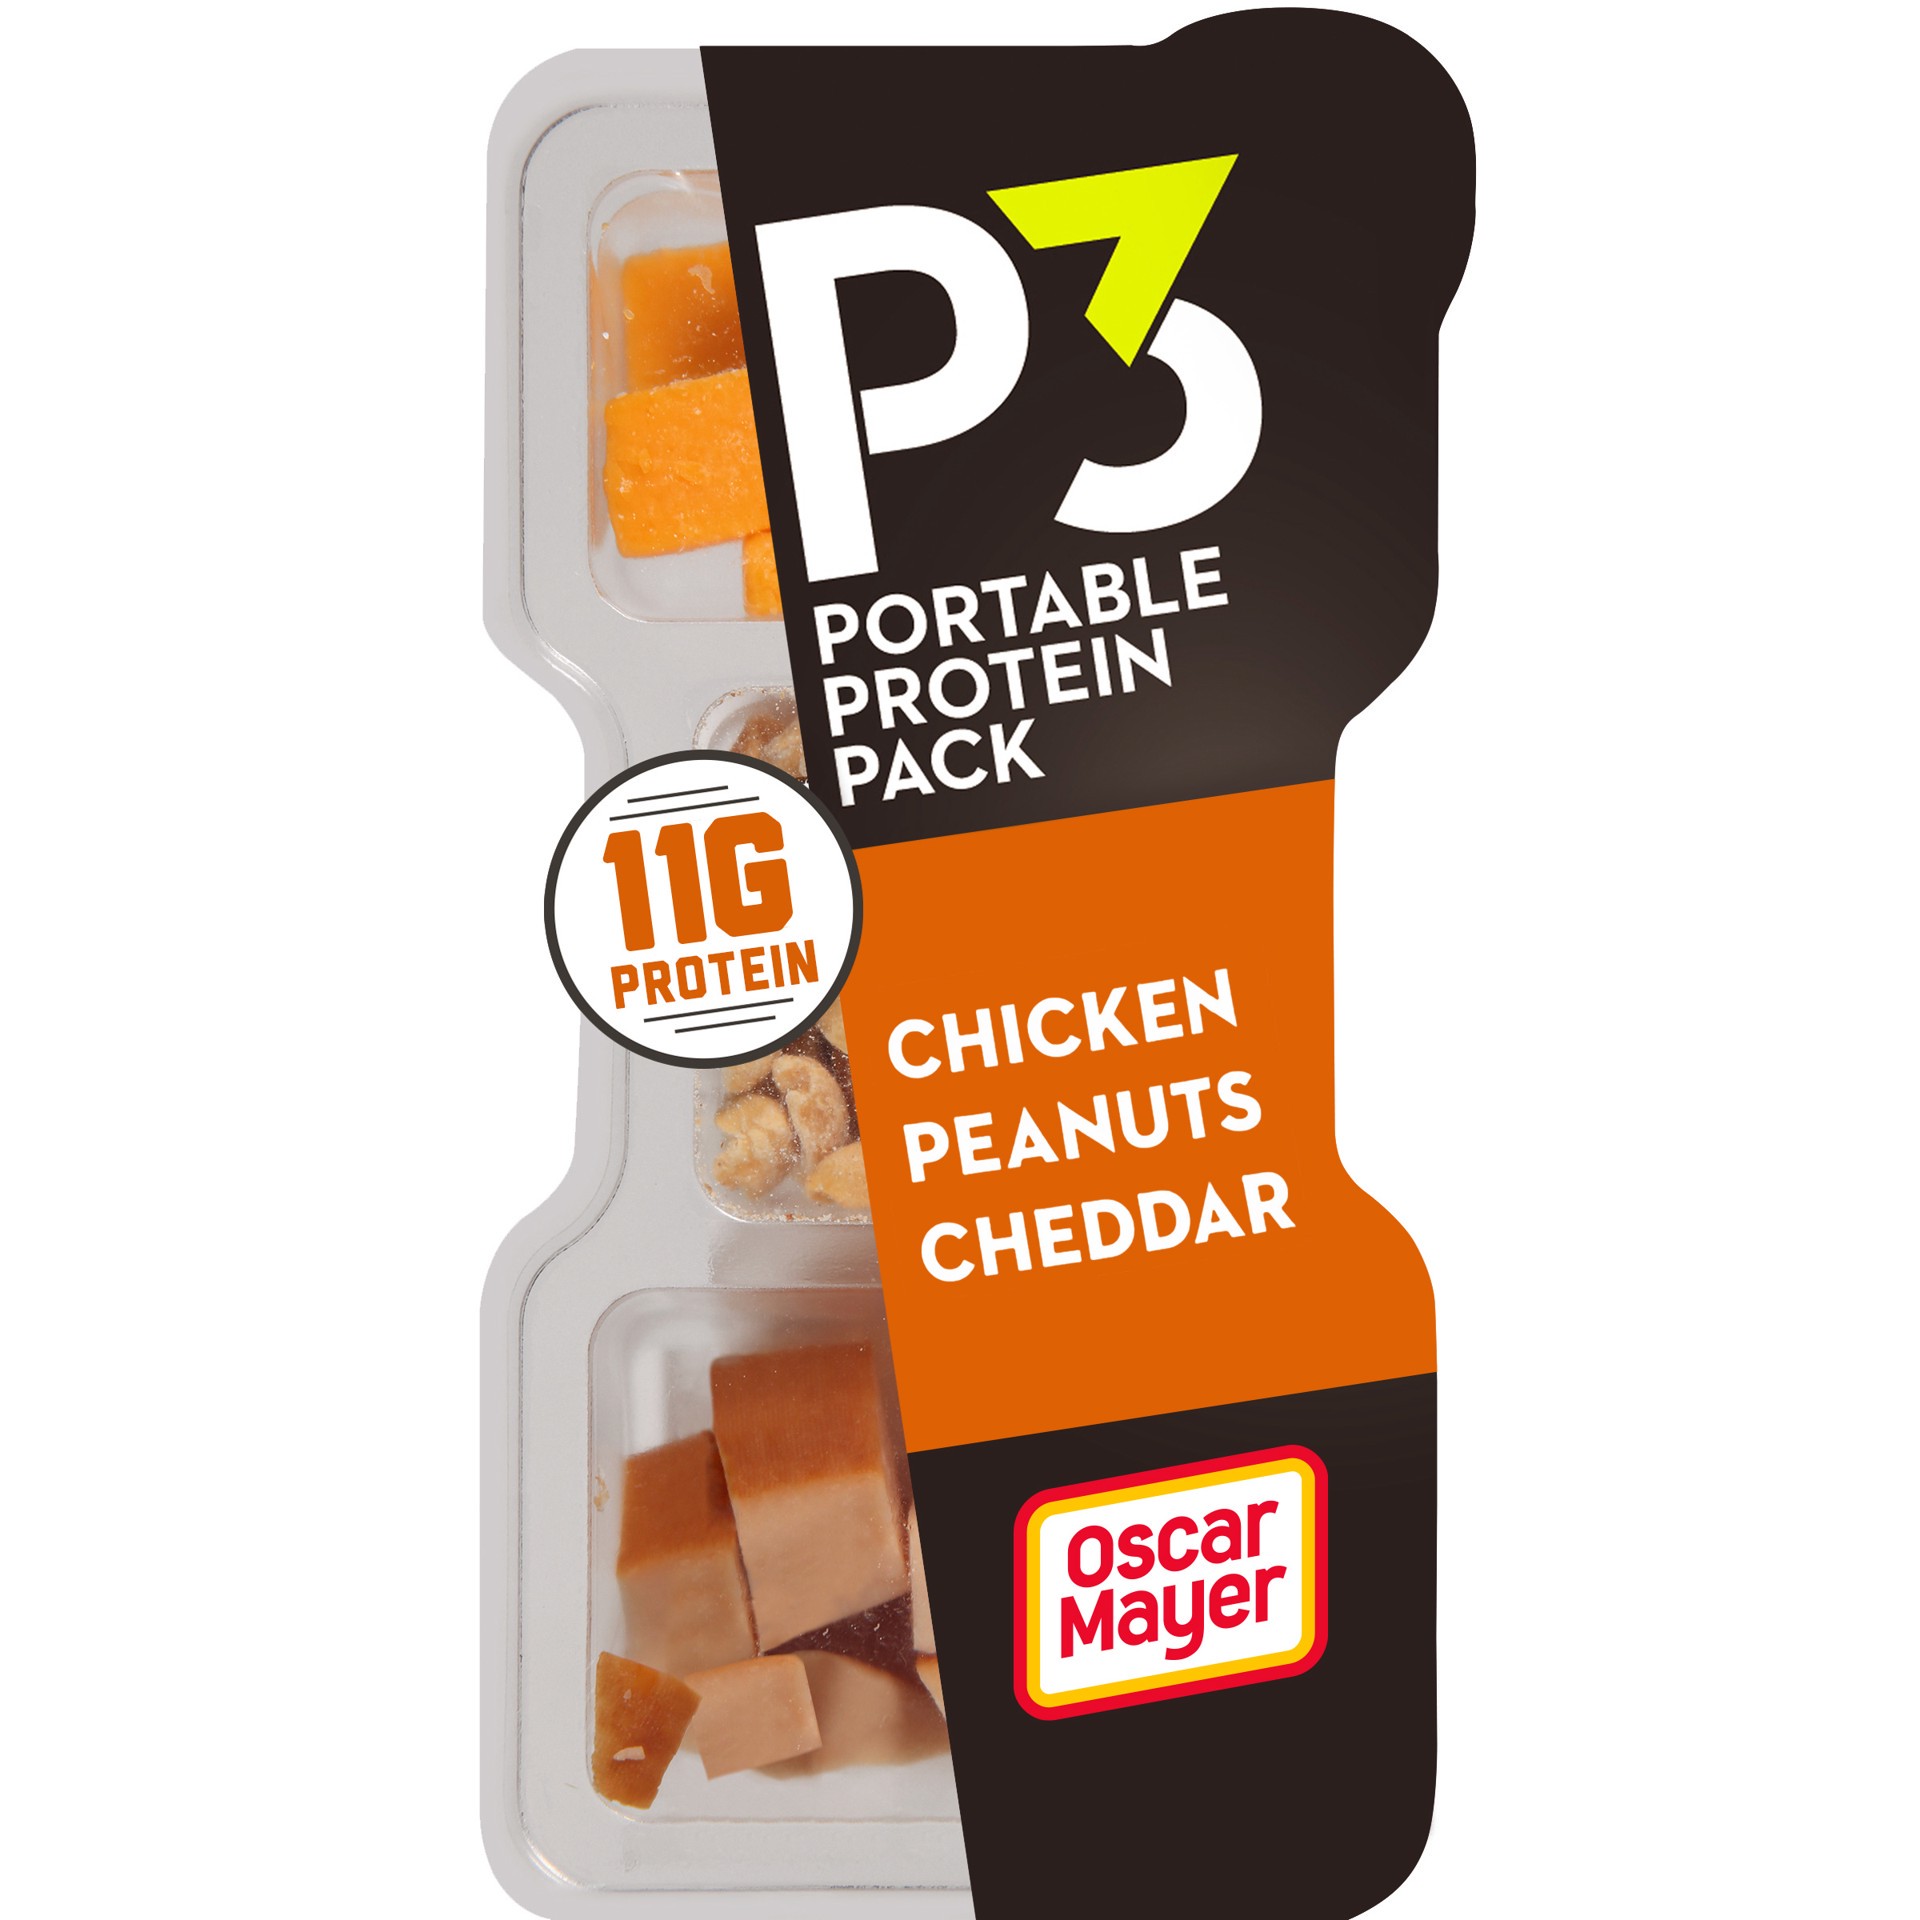 slide 1 of 9, P3 Portable Protein Snack Pack with Chicken, Peanuts & Cheddar Cheese, 2 oz Tray, 2 oz